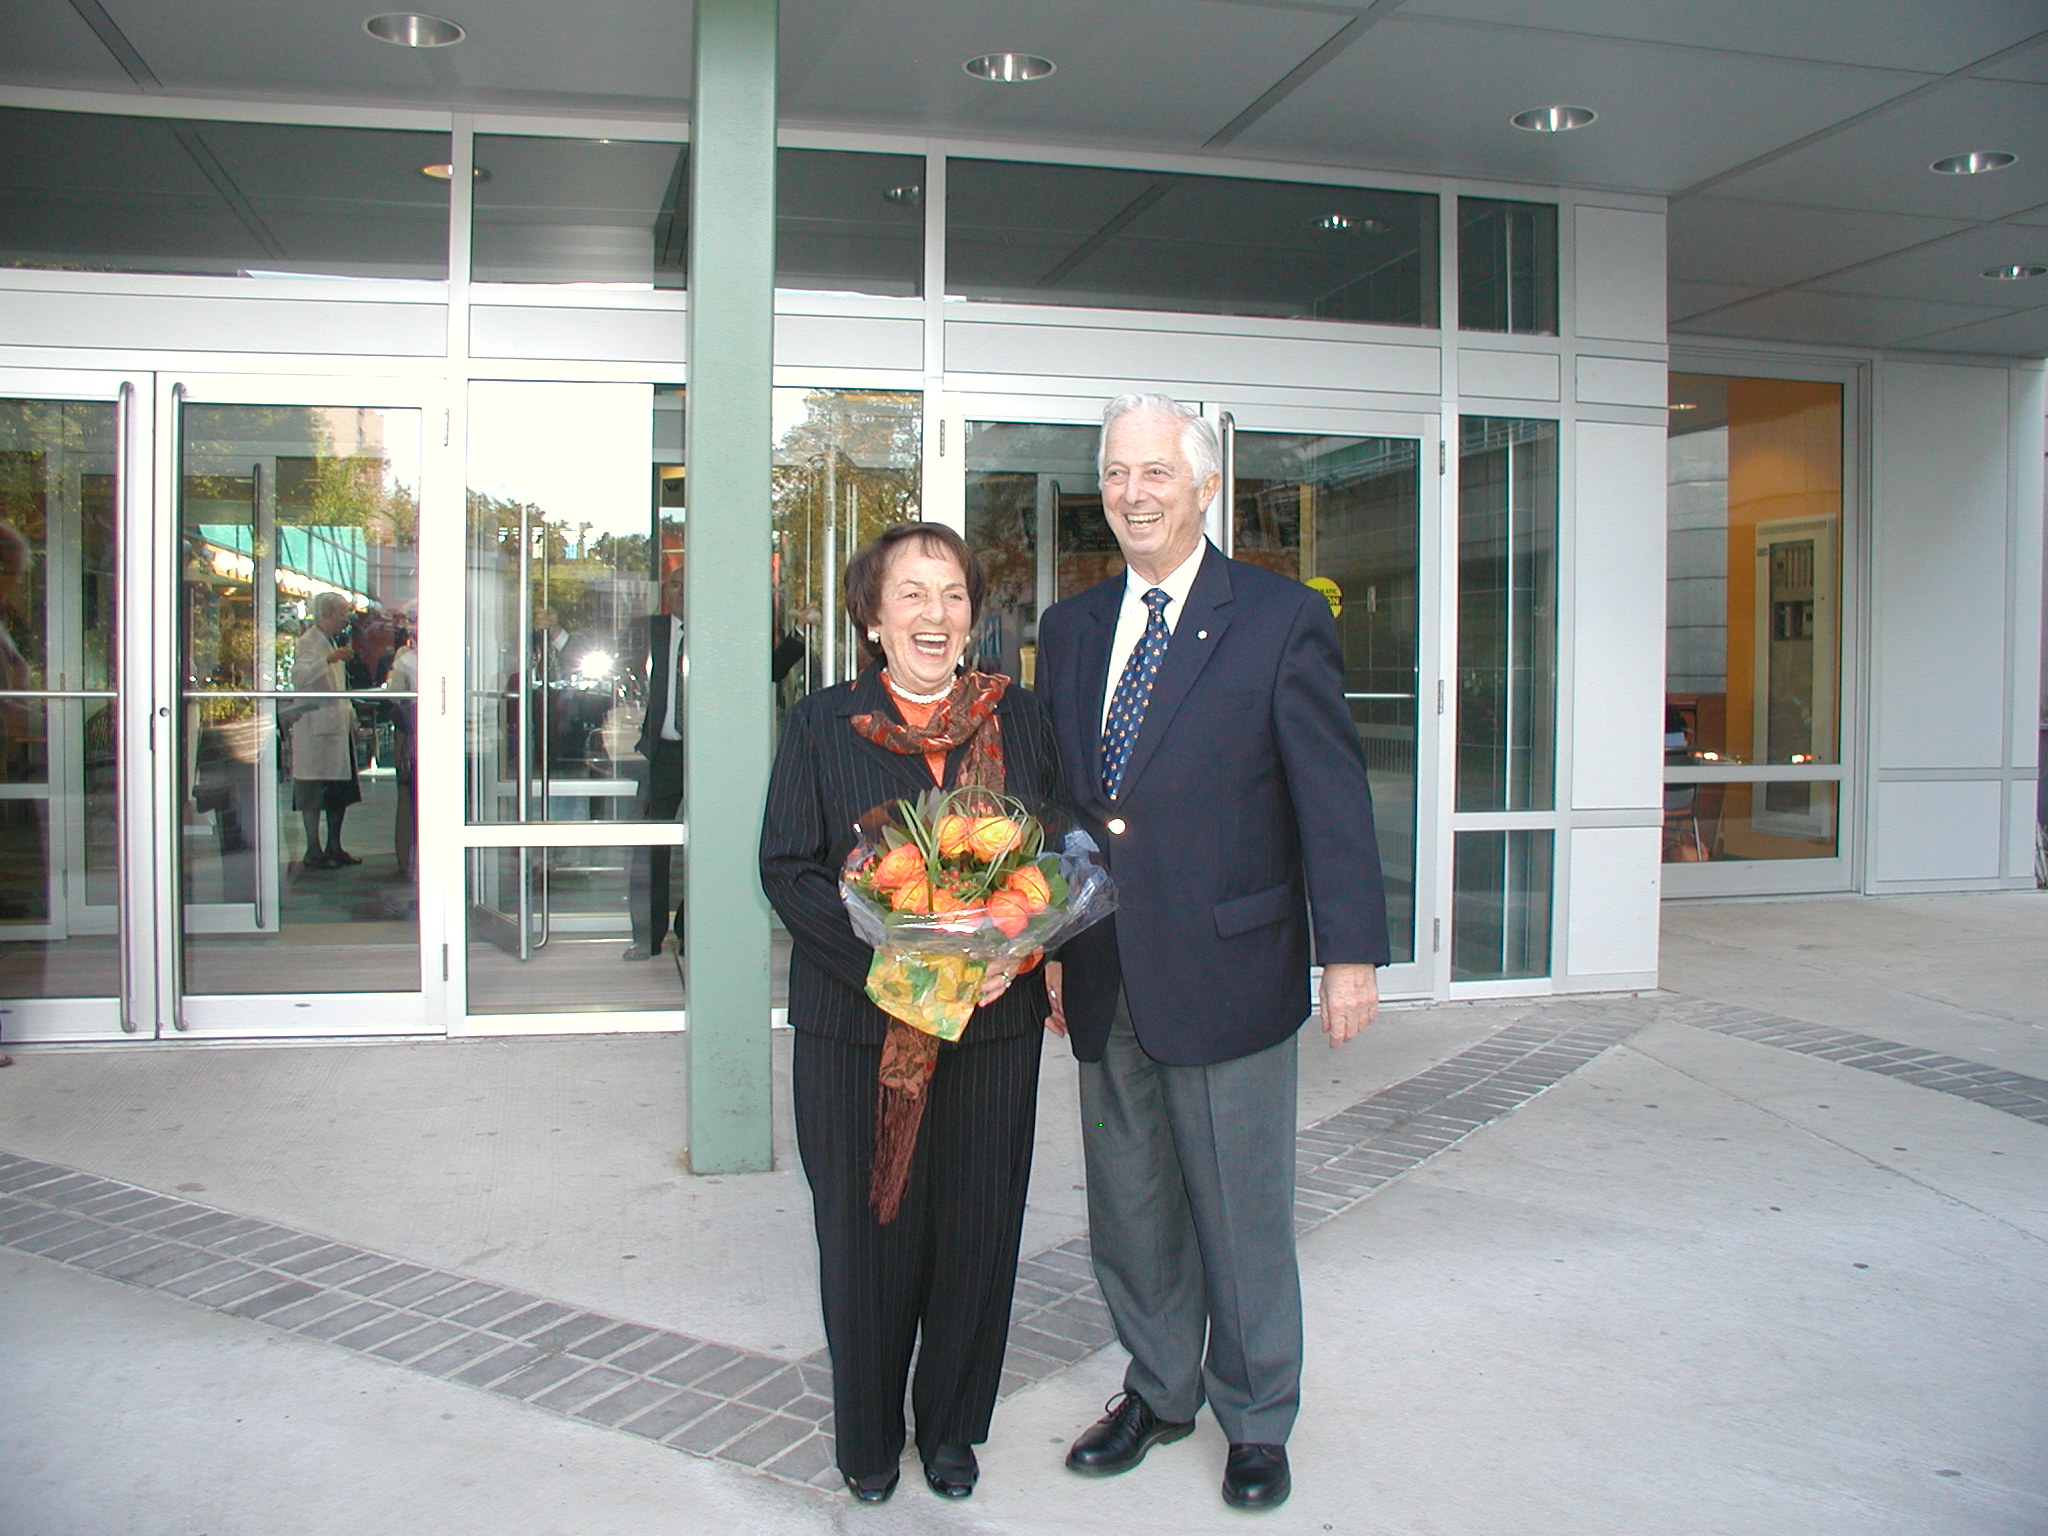 Dr. Richard Goldbloom and his wife, Ruth, on the opening of IWK’s research and clinical care pavilion named in his honour.